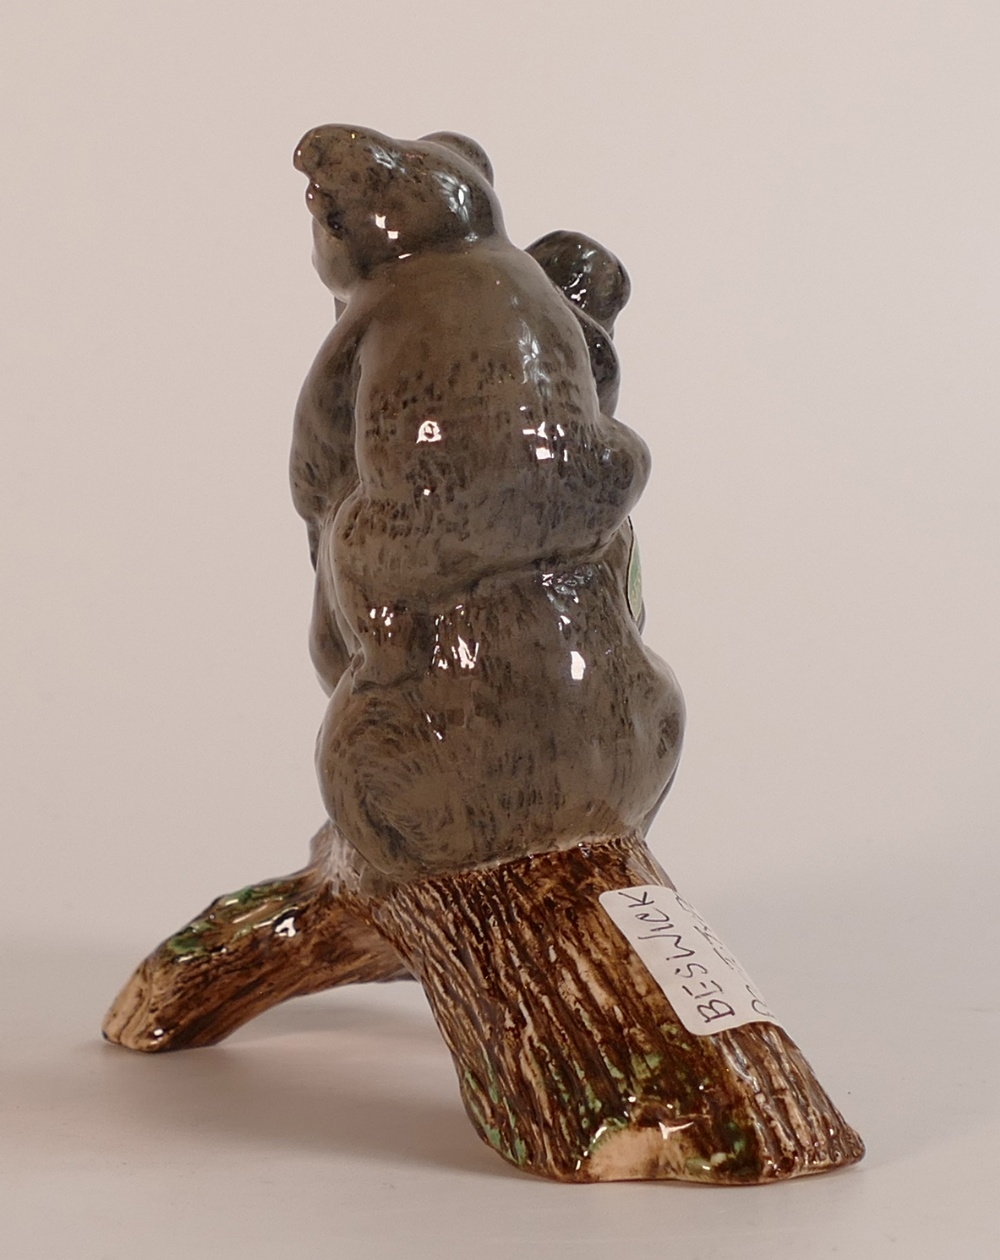 Beswick Prototype Figure of a Koala bear with baby on its back, climbing a tree branch, possibly - Image 5 of 6